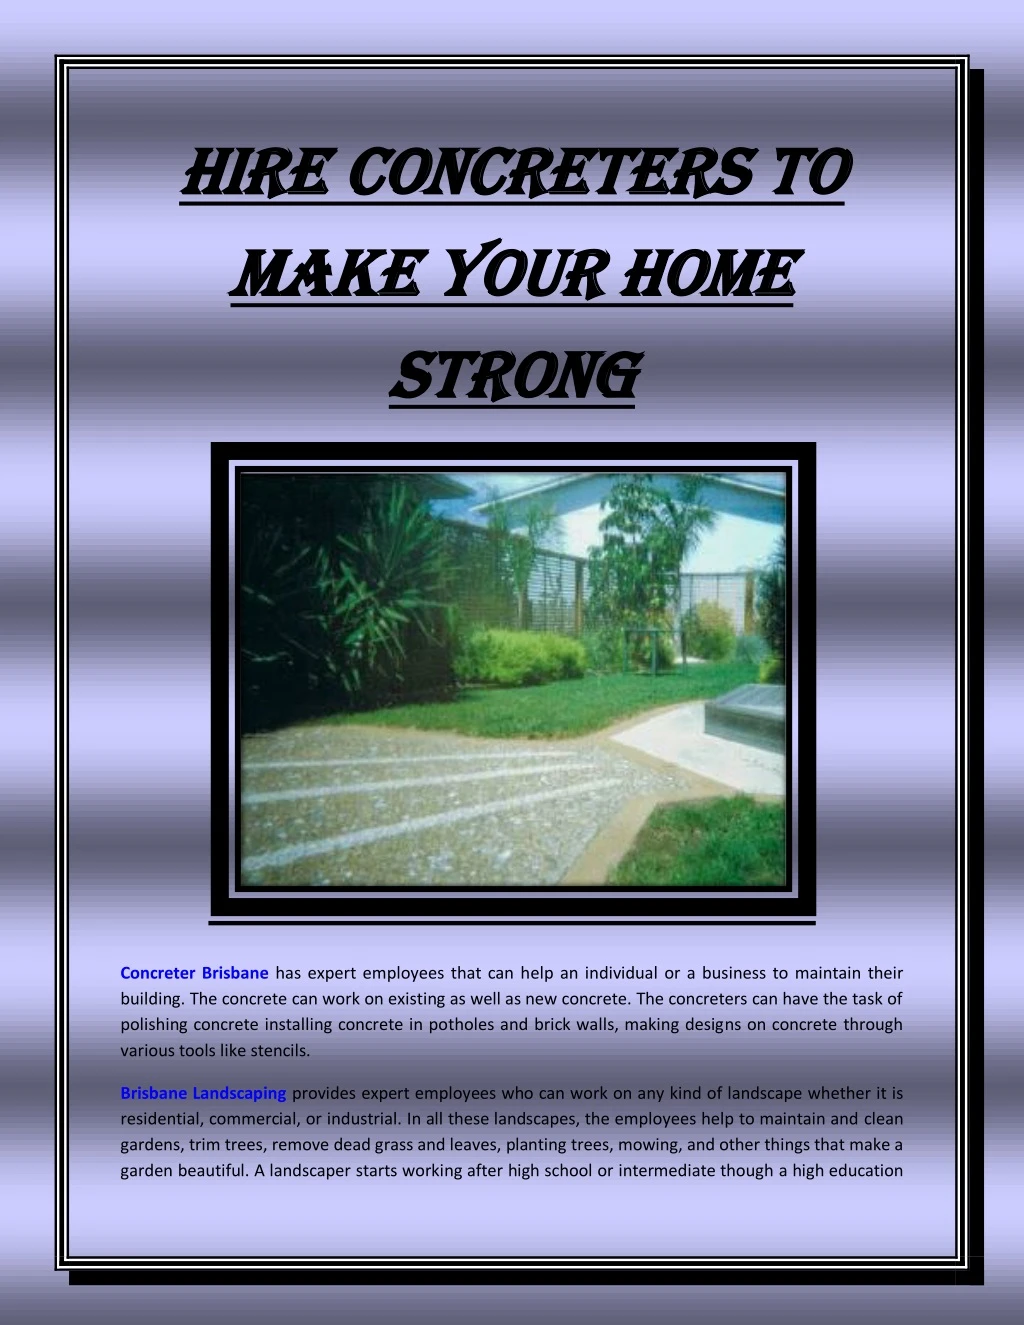 hire hire concreters to concreters to make your